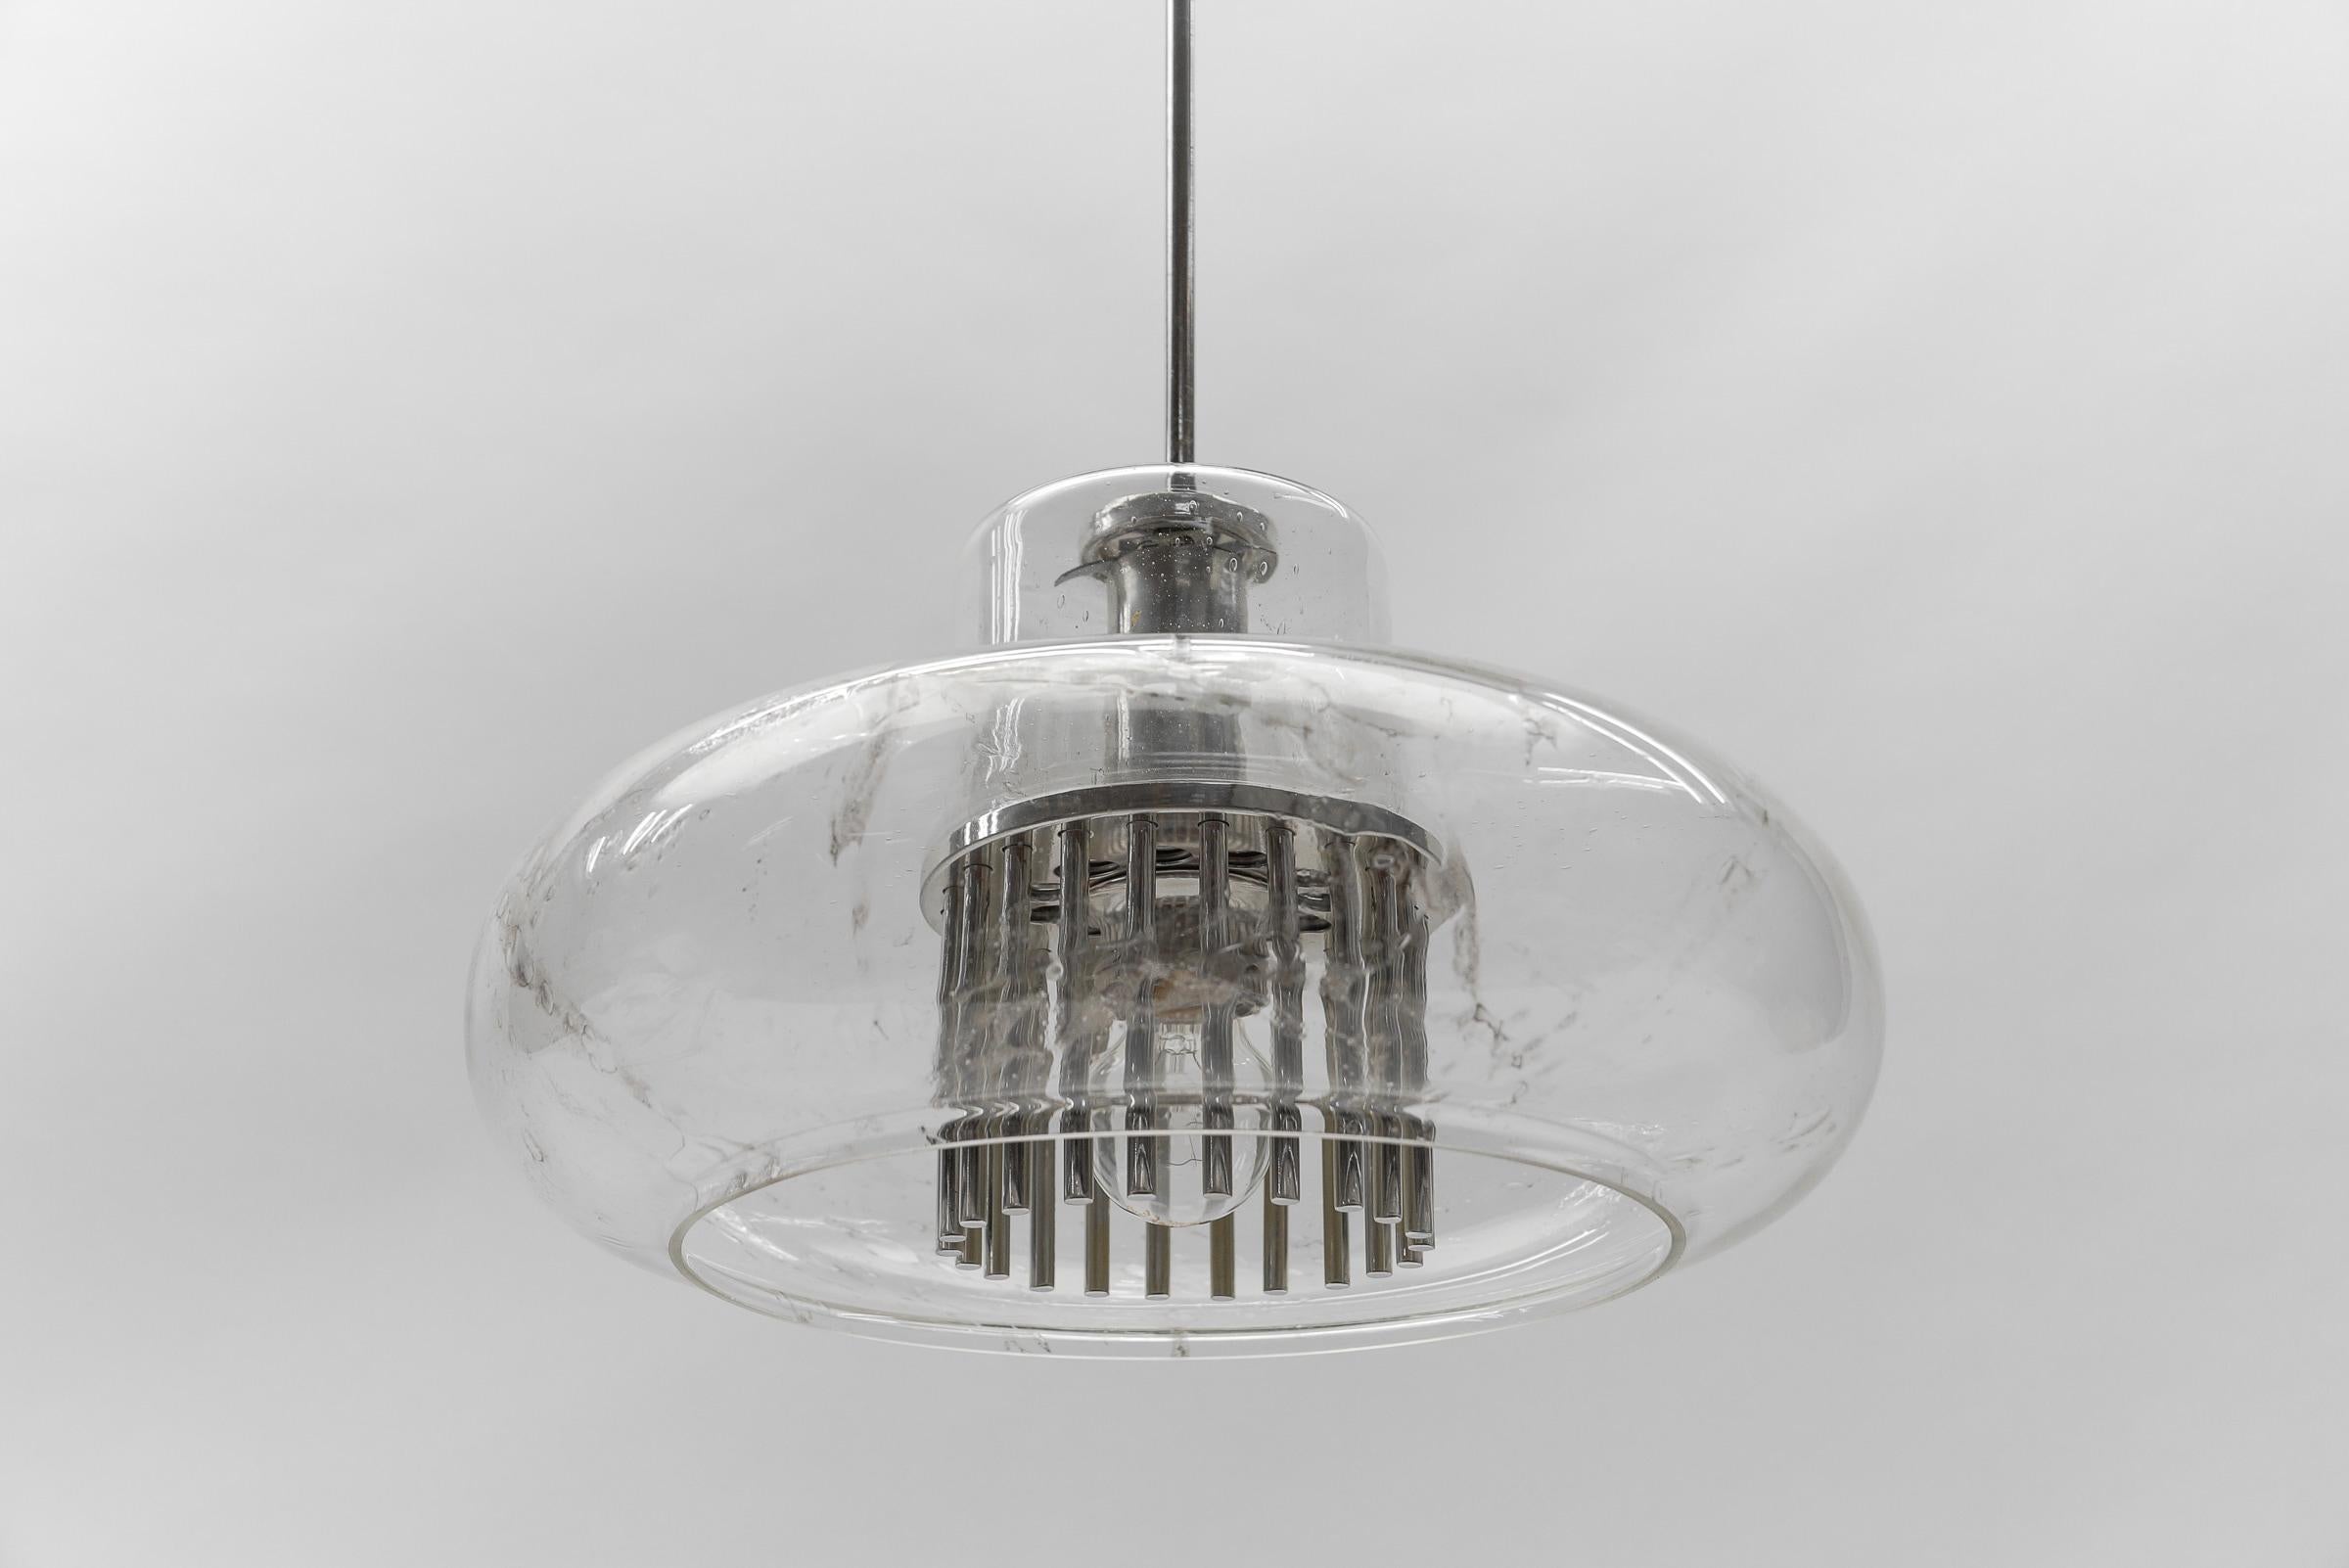 Mid Century Modern Chrome & Glass Pendant Lamp by Doria, 1960s Germany  For Sale 2